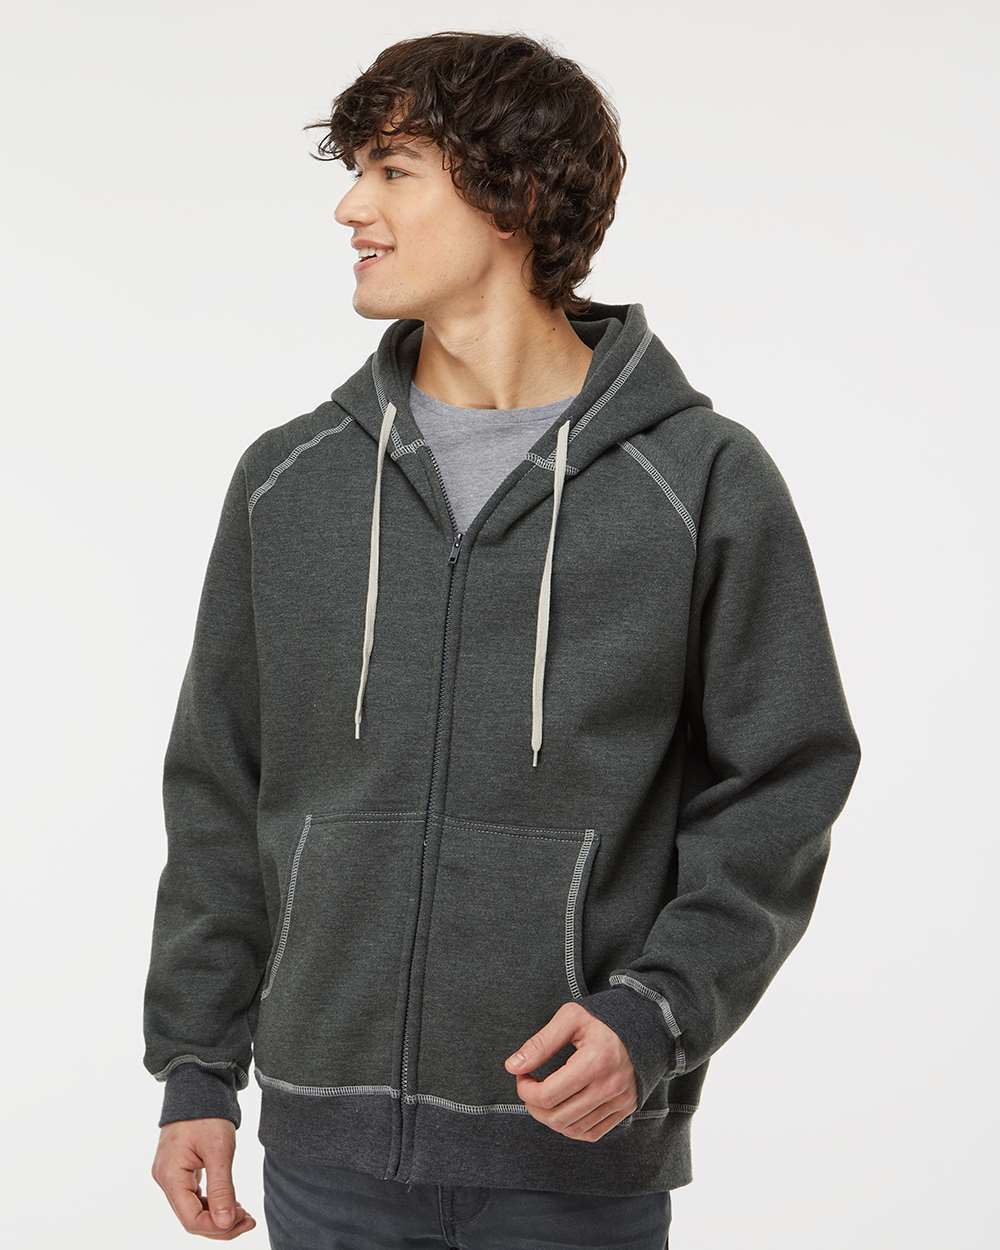 King Fashion Extra Heavy Full-Zip Hooded Sweatshirt KP8017 #colormdl_Charcoal Mix